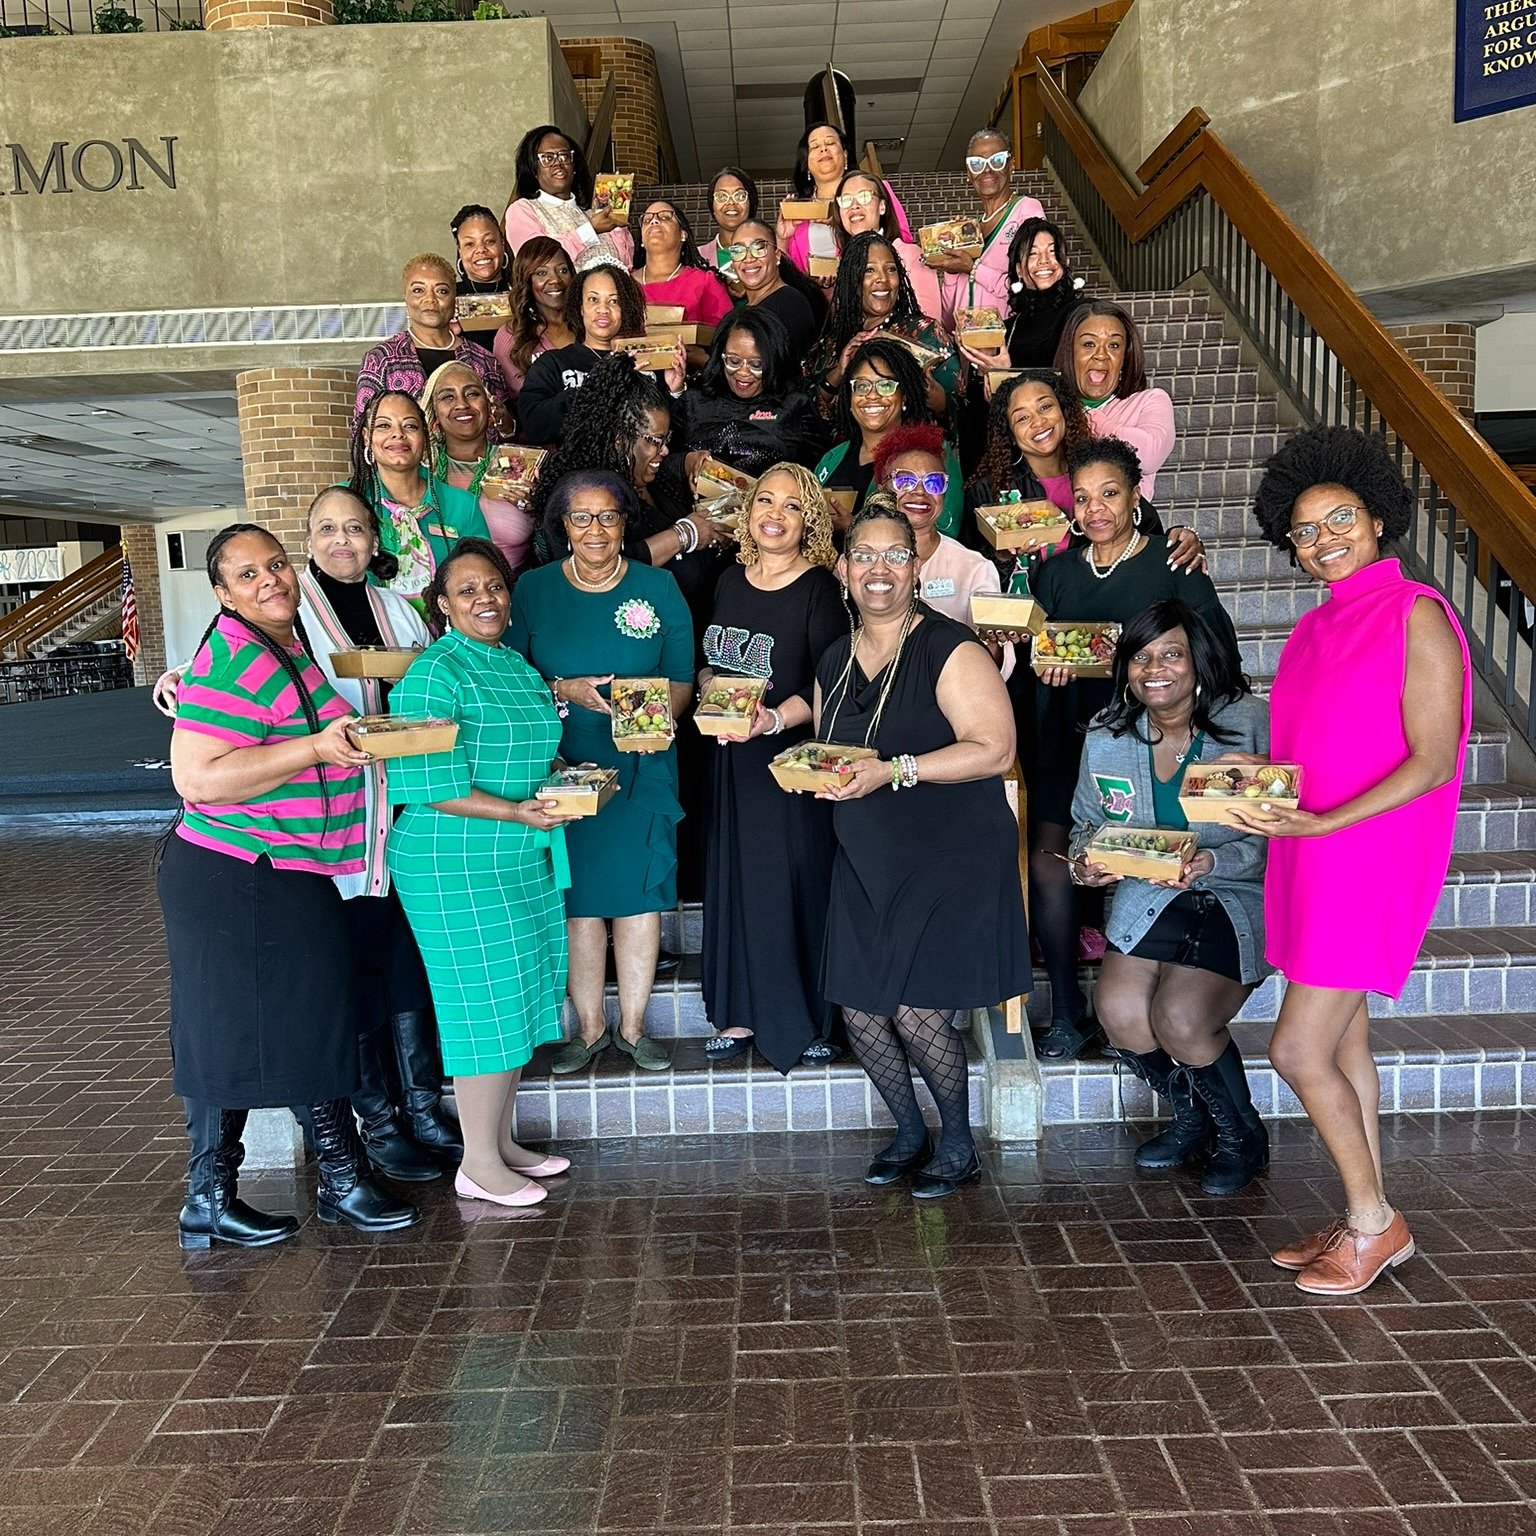 This charcuterie class was so much fun! Loved teaching these ladies some charcuterie skills! Alpha Kappa Alpha Sorority, Inc. - Sigma Sigma Omega Chapter